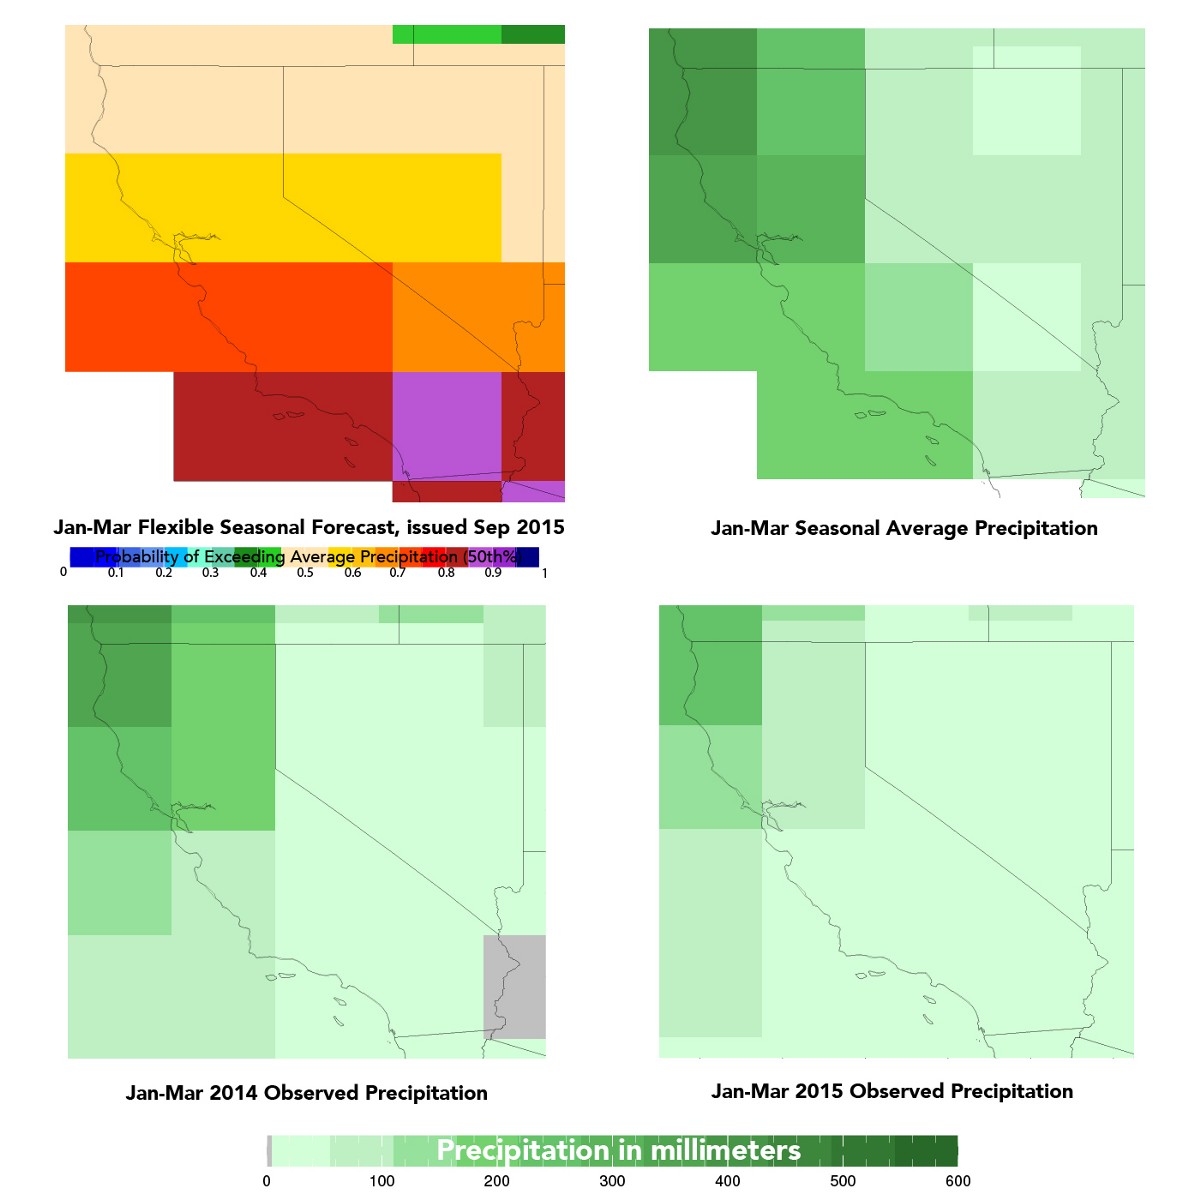 In this top left image, as in the previous figure, this shows the forecast for the season (in this case, Jan-Mar 2016) relative to the season’s average. Much of the state has at least a 60% chance of getting more precipitation than average, with the southern quarter of the state having at least an 80% chance. The top right image shows the average precipitation (rain and snow) for the January to March season based on 1981–2010 data. The numbers overall are higher than those from October to December, but you can still see the trend of more precipitation in the northern part of the state. These are some of the most critical months for California to receive precipitation that can be used in the rest of the year. The two bottom images show the precipitation from the last two January to March seasons. 2015 was drier than 2014, but both were below average, as indicated by lighter shades than those seen in the map of average precipitation.